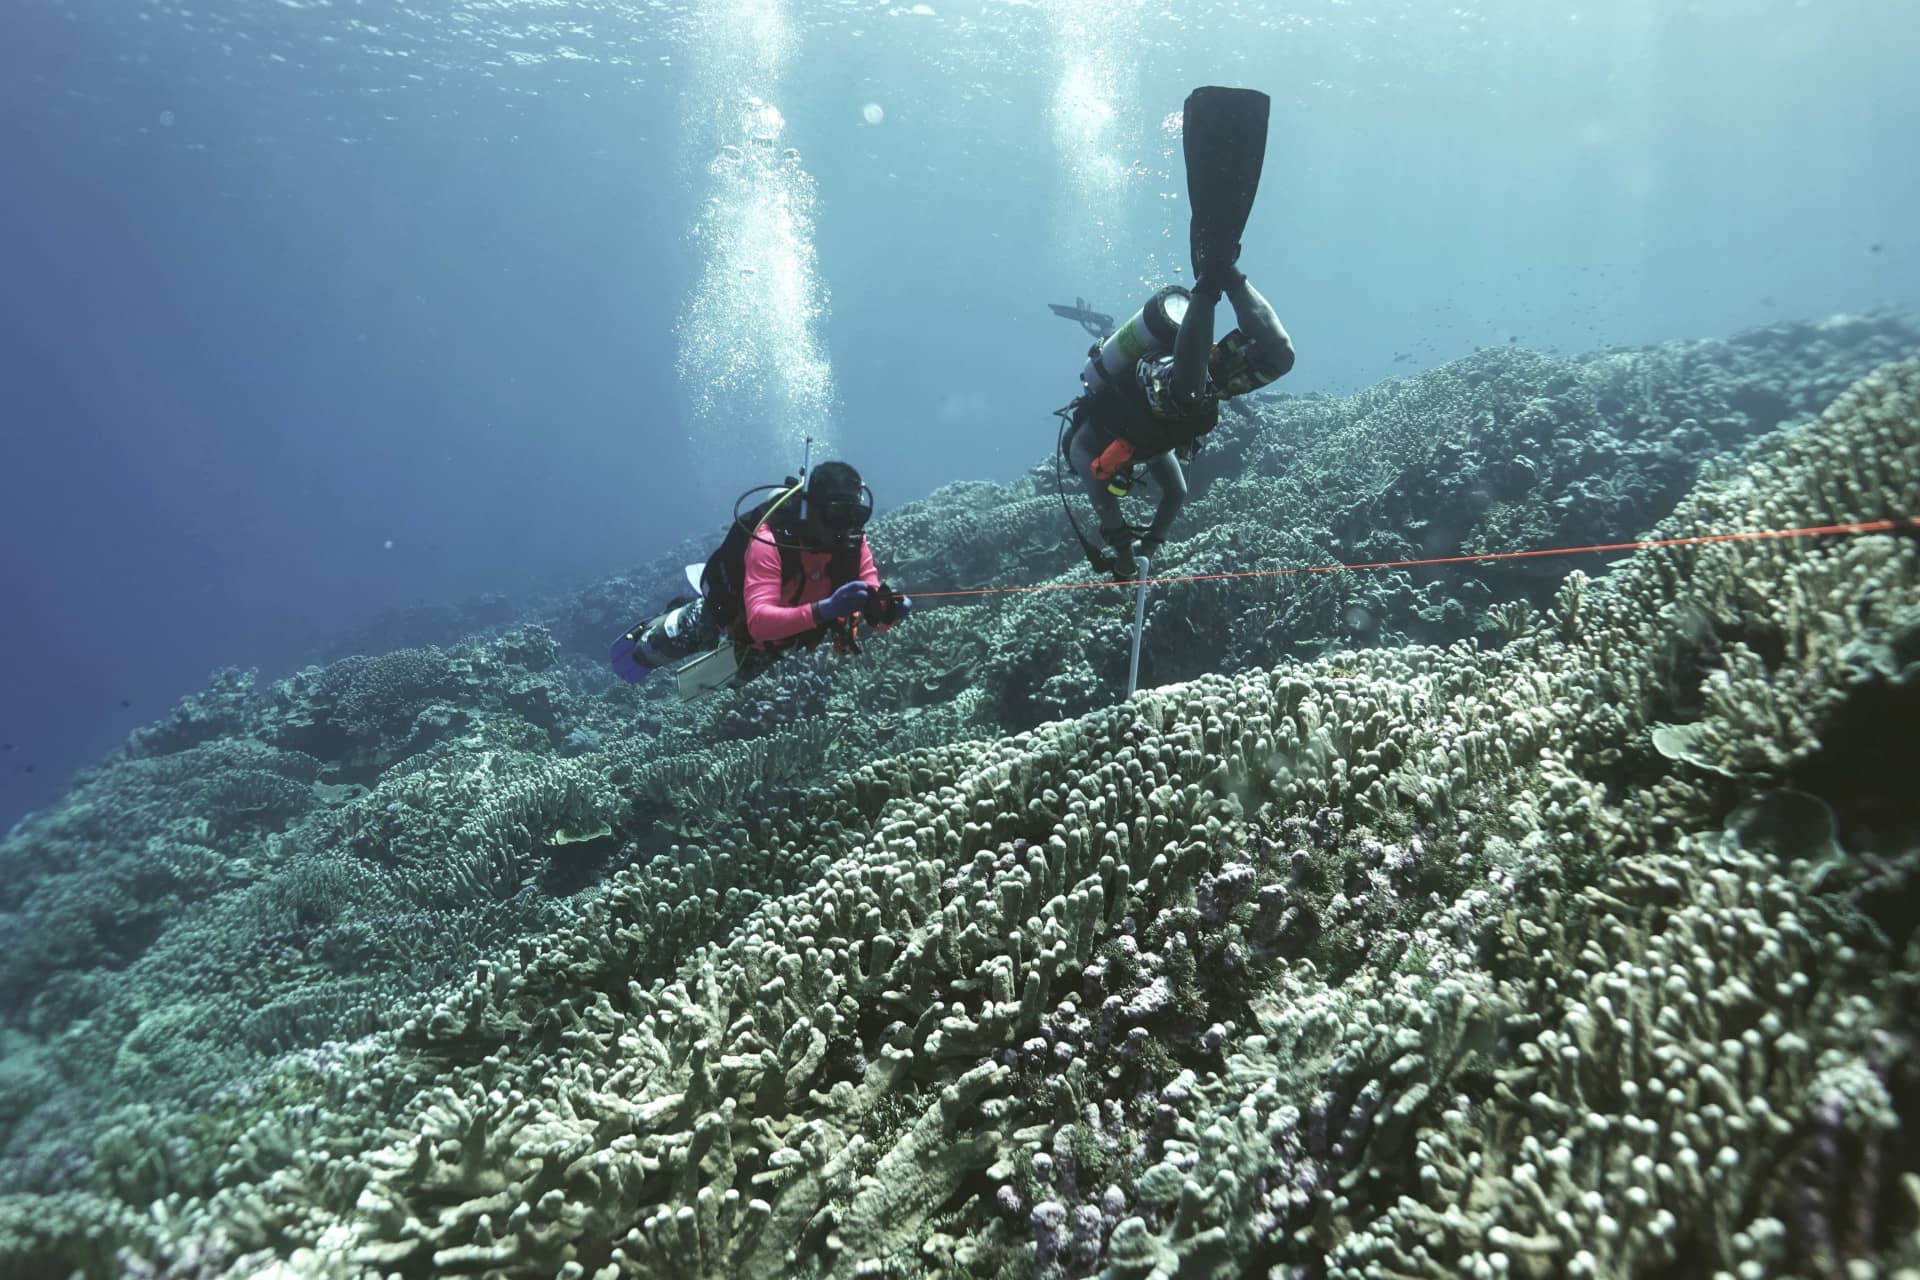 Divers with an expedition team into remote atolls in the Federated States of Micronesia